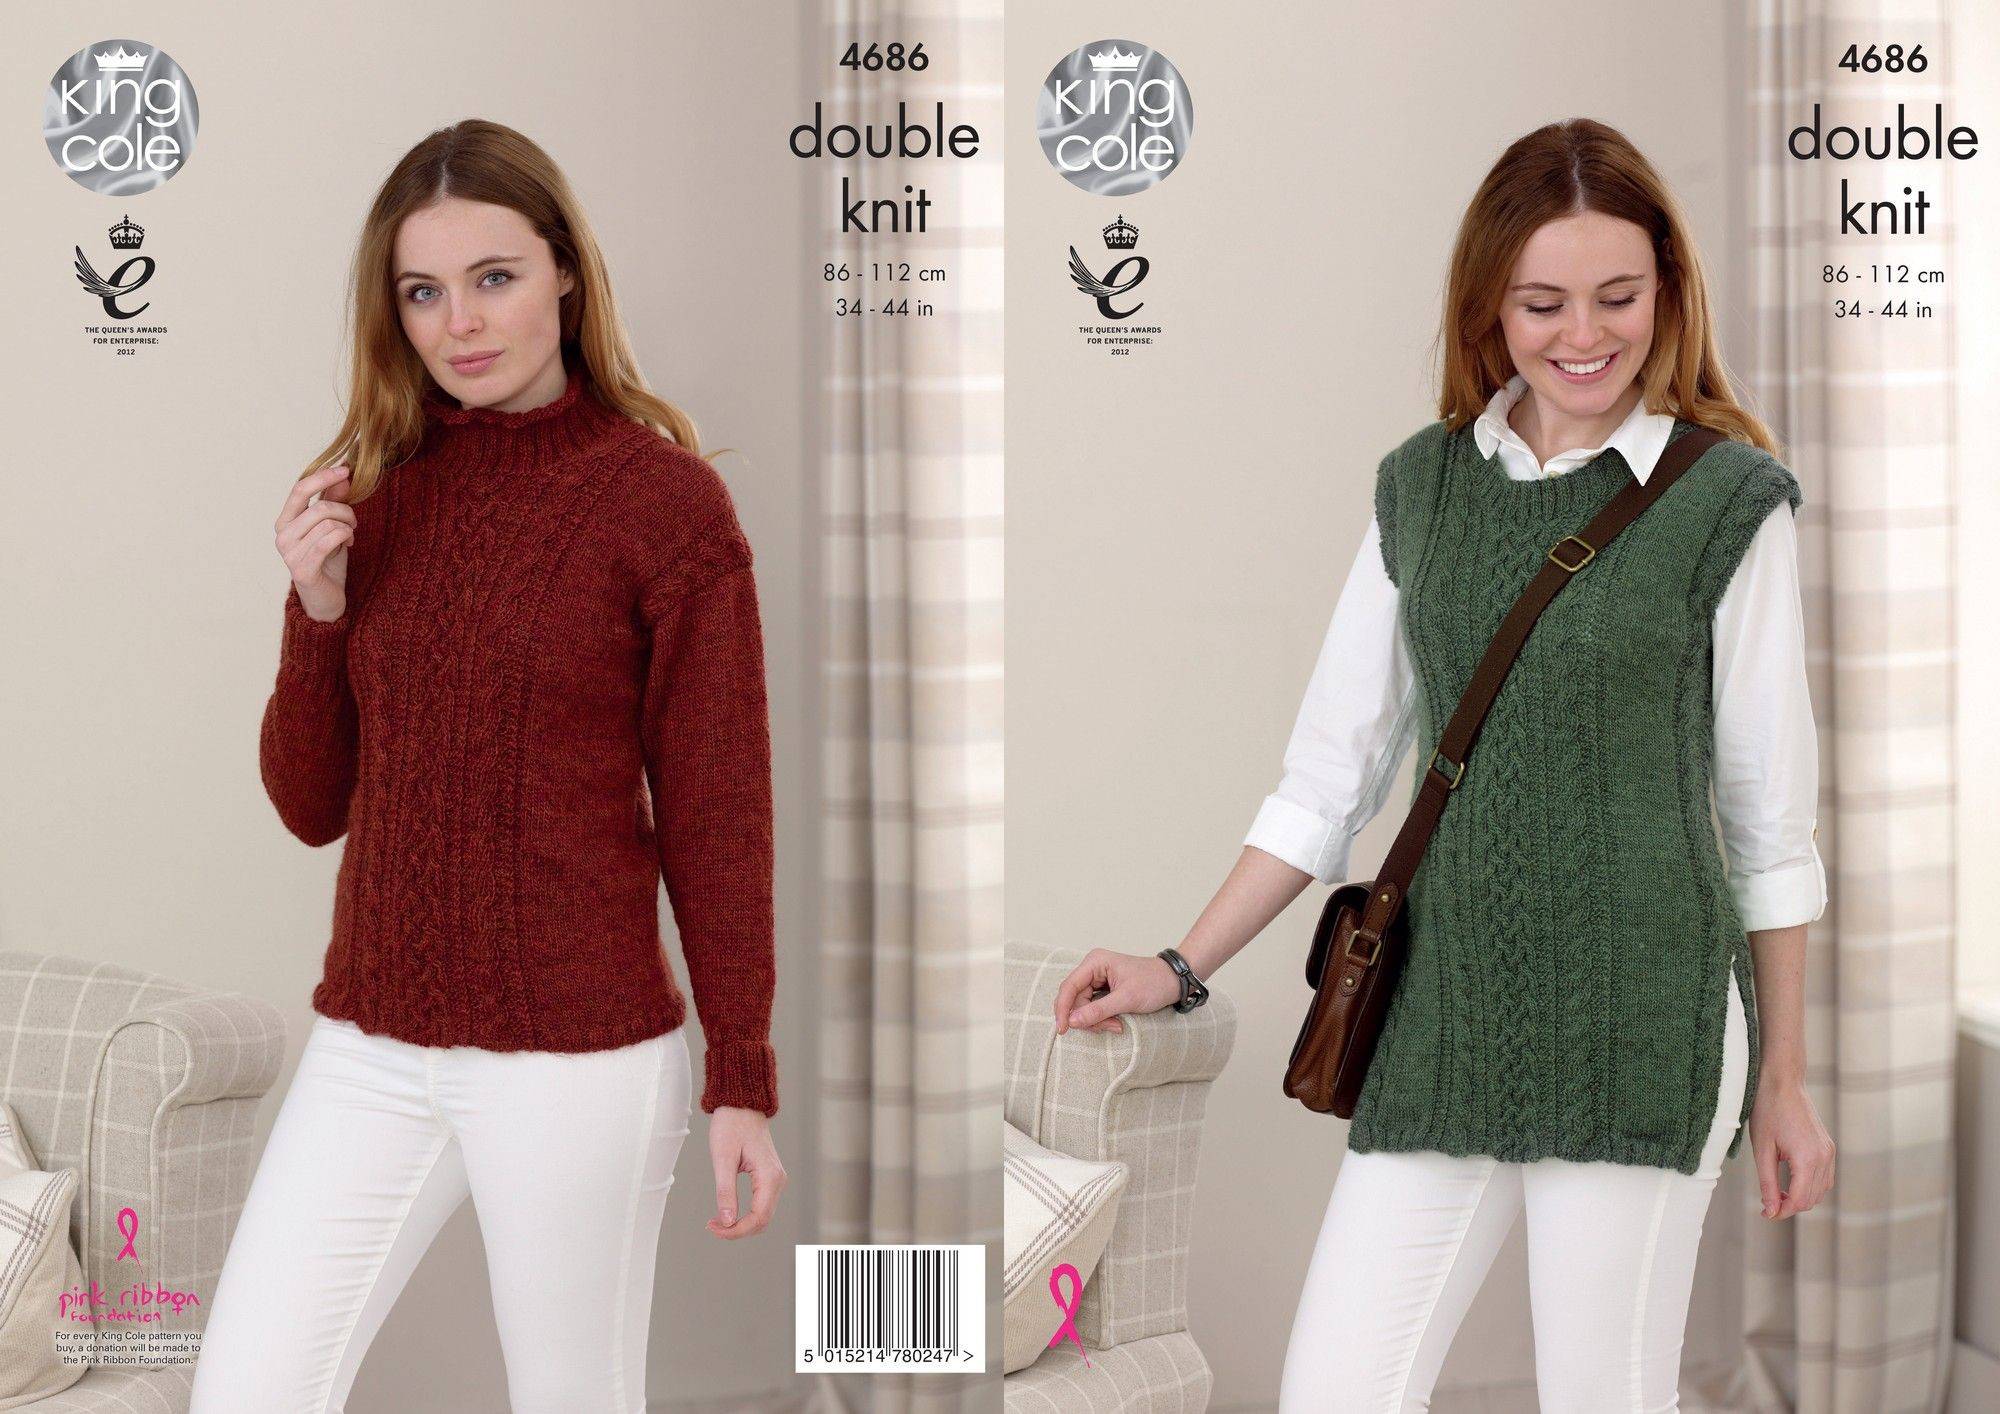 Sweater and Tunic in King Cole Panache DK (4686) | The Knitting Network